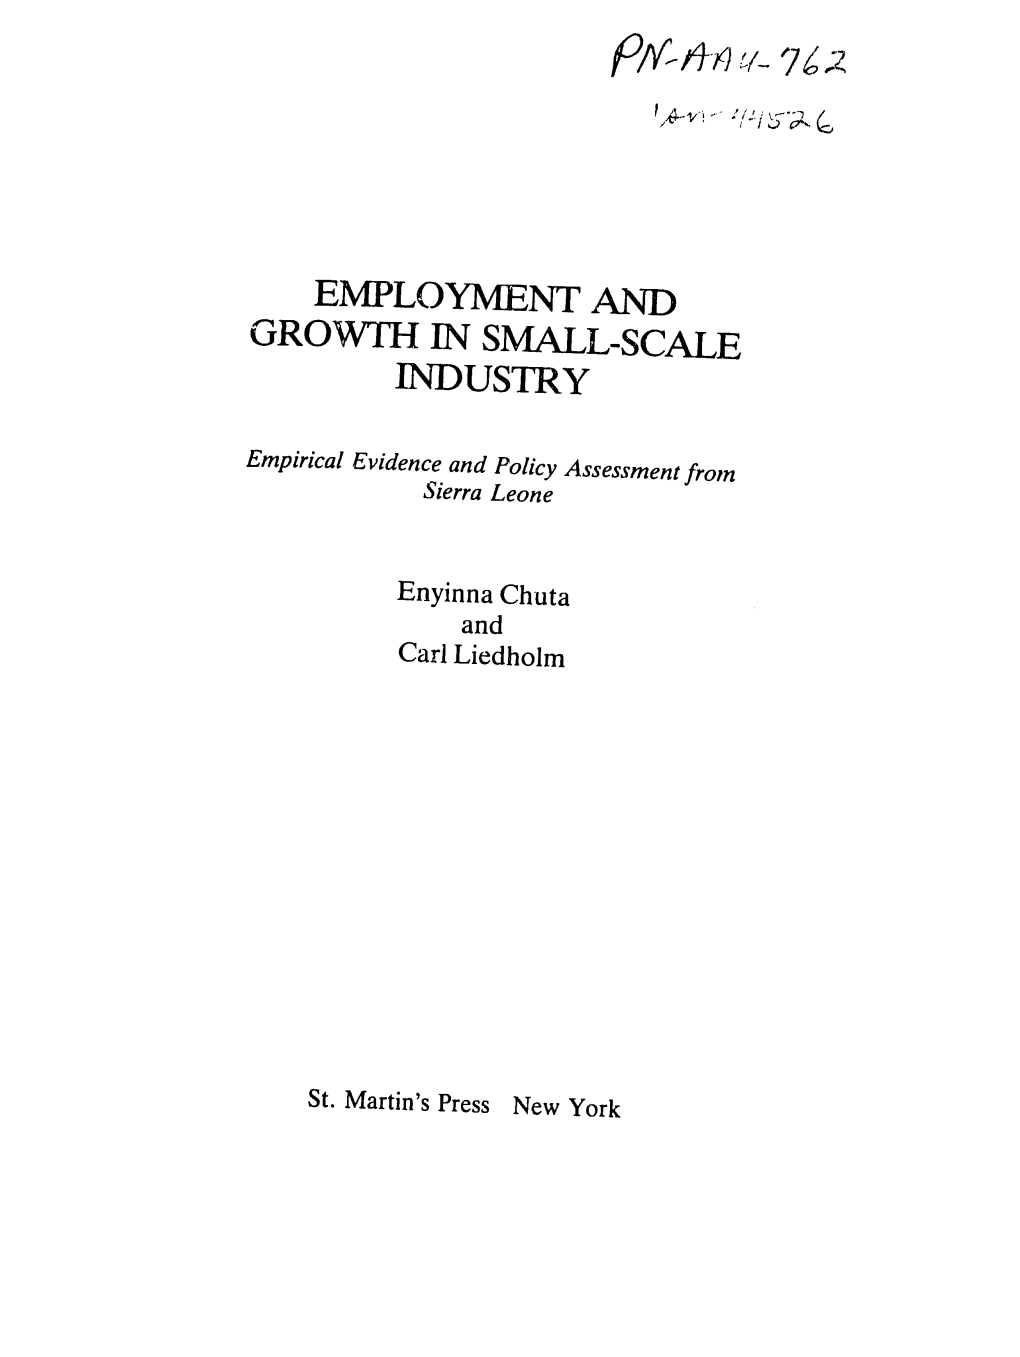 Employment and Growth in Small-Scale Industry